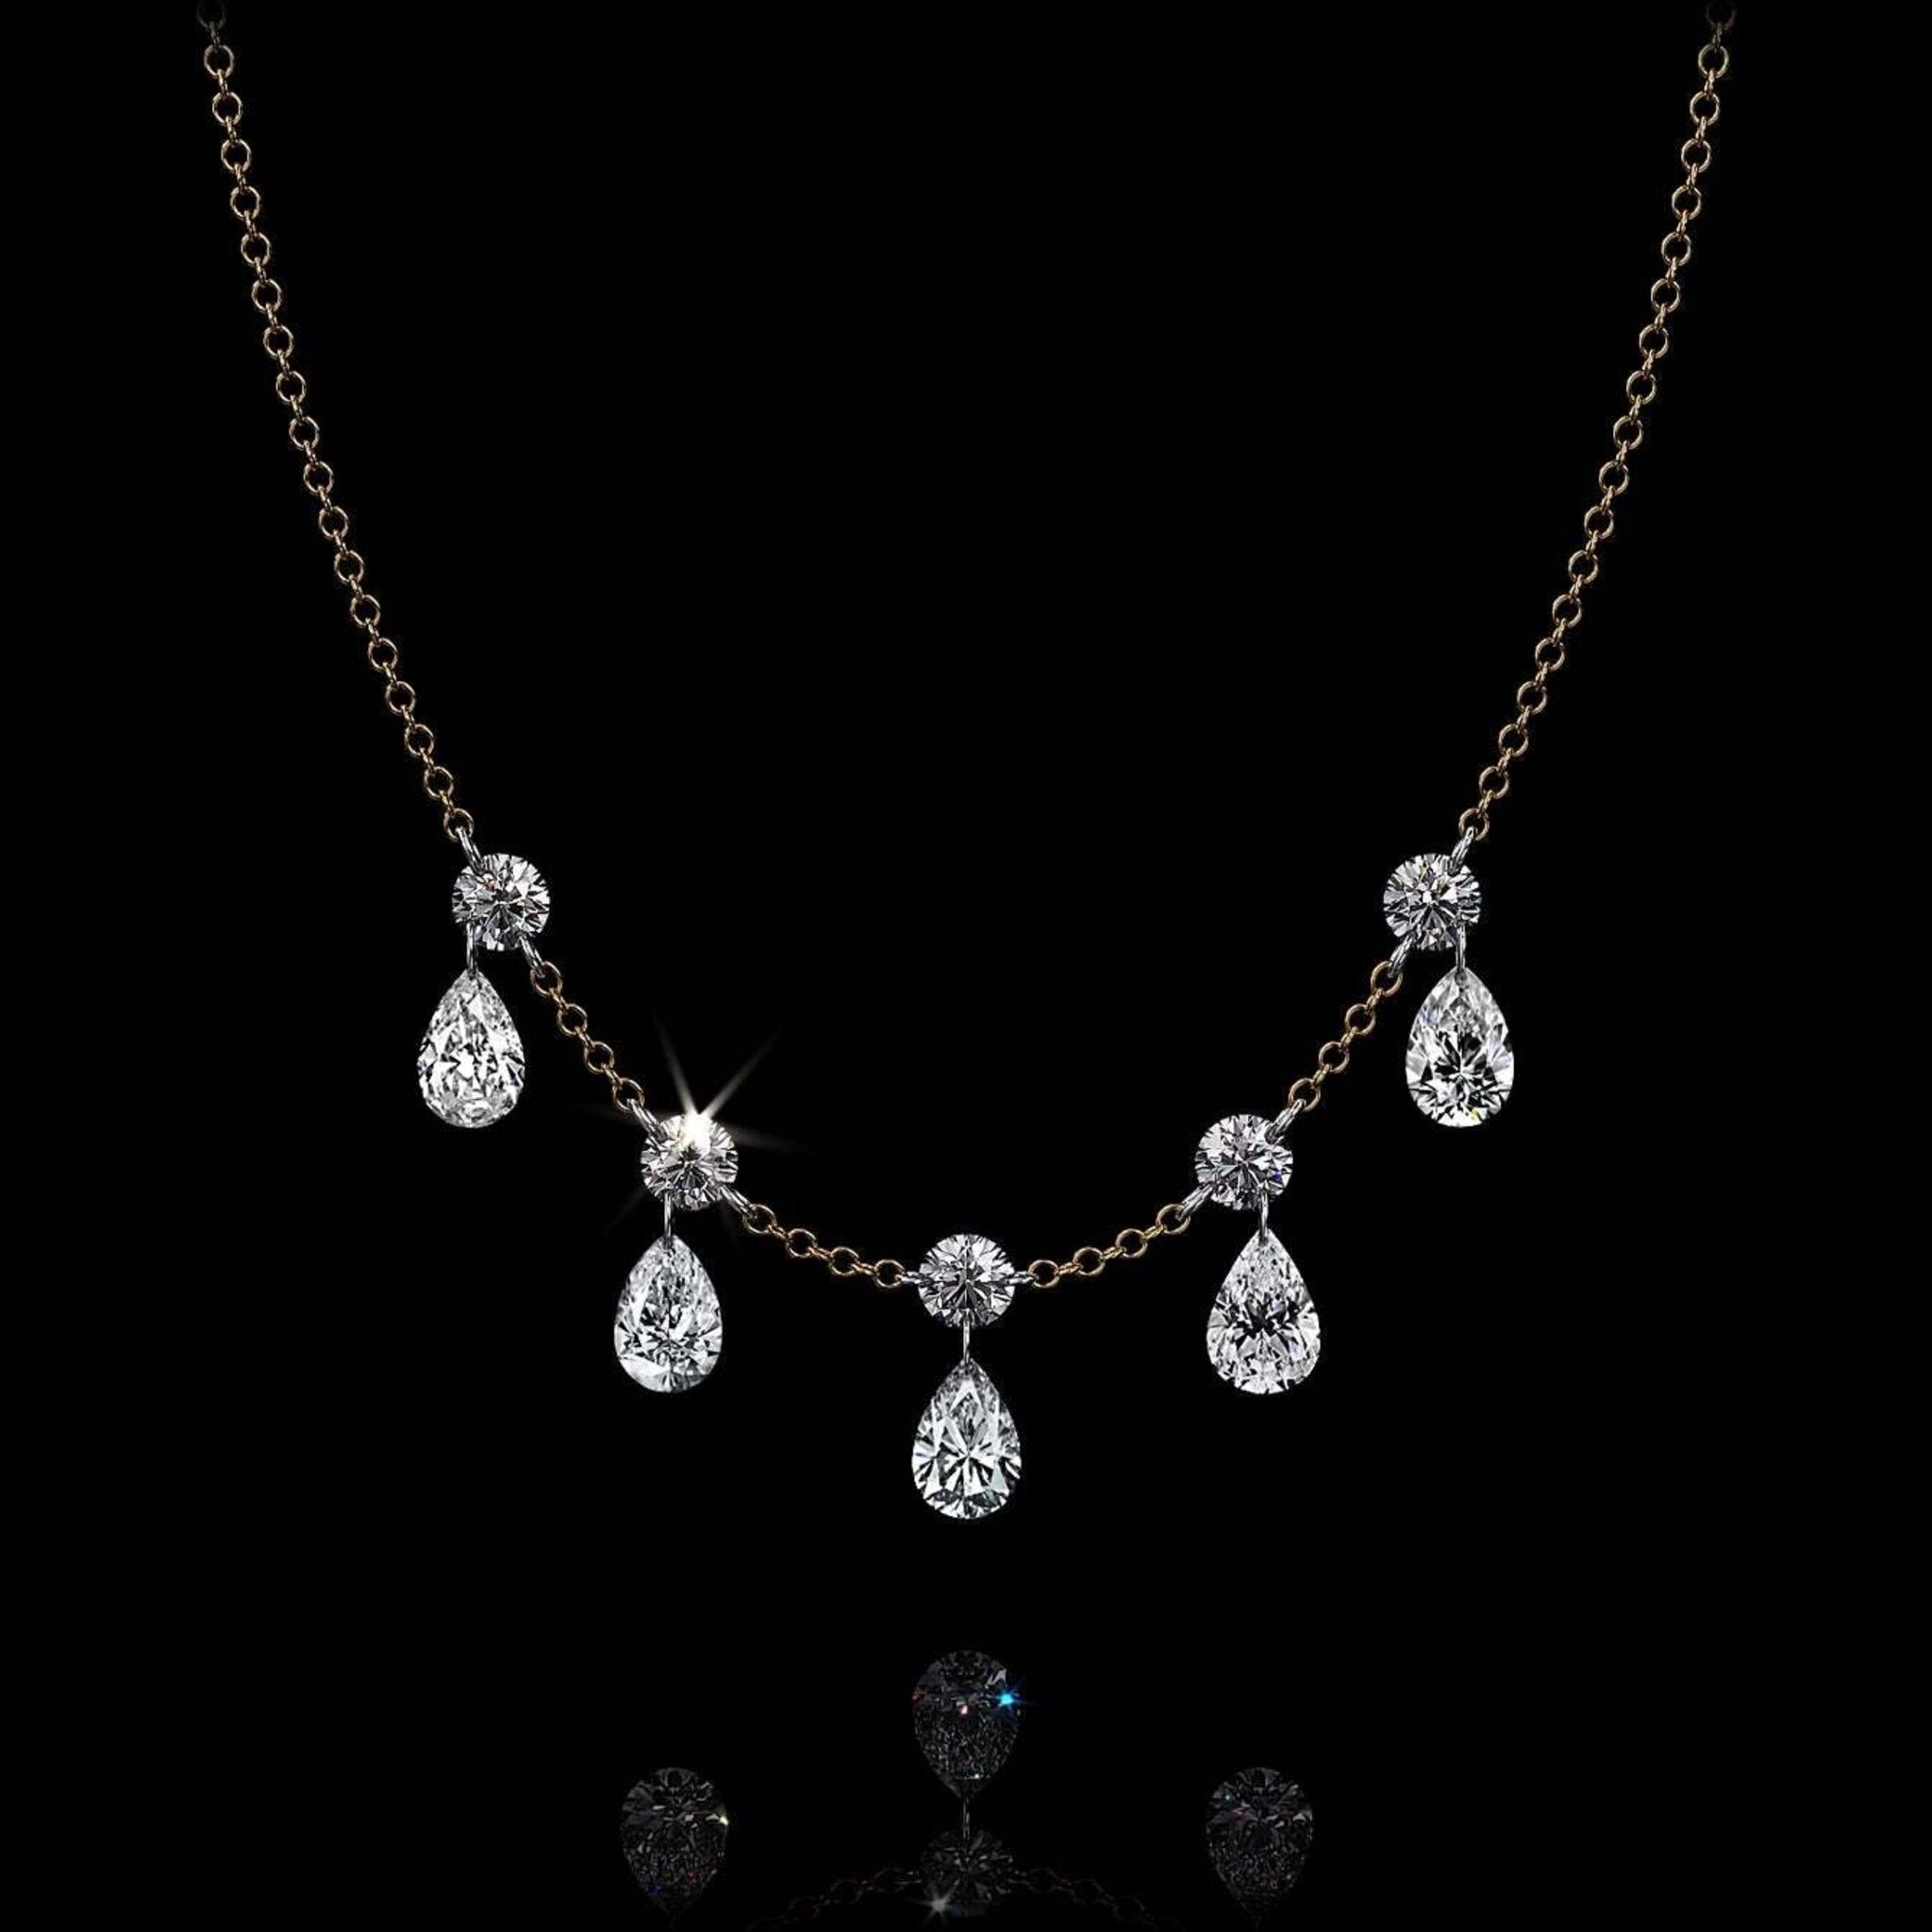 Aresa New York - Shelley No. 10 with Pear Necklaces - 18K Yellow Gold with 2.00 cts. of Diamonds